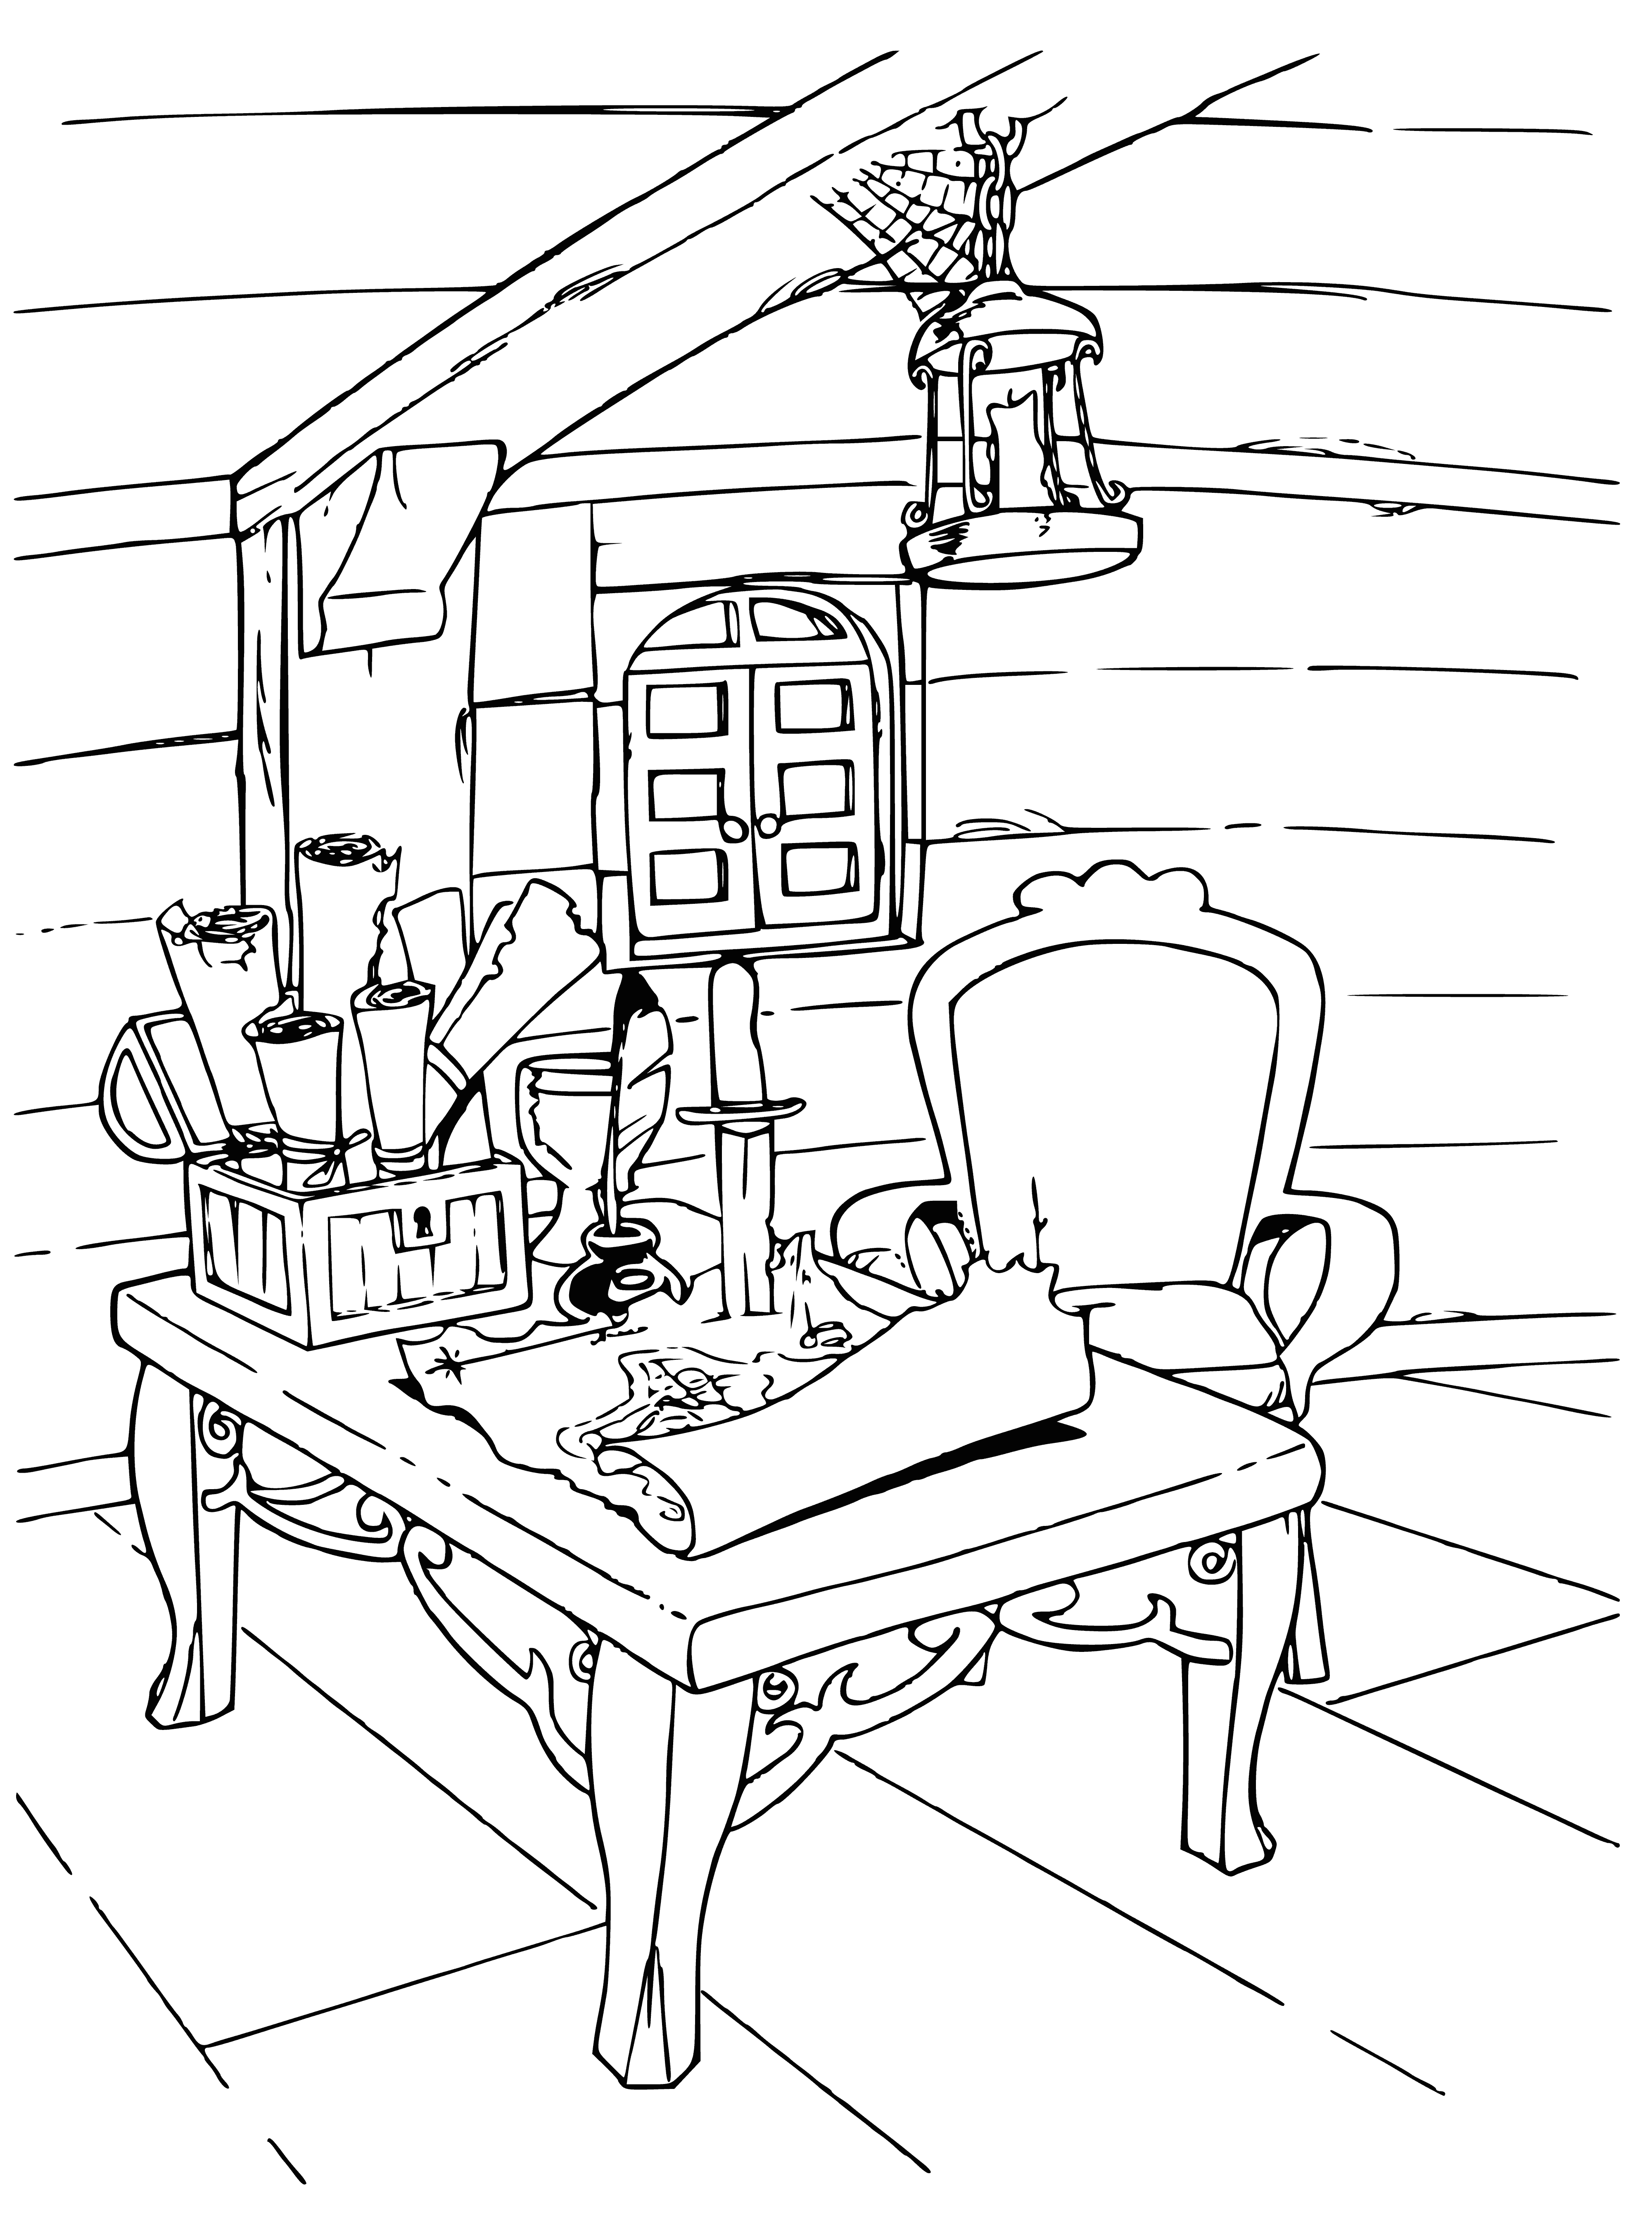 coloring page: Tiny cabin, futon, desk with maps, shuttered window, door in center.